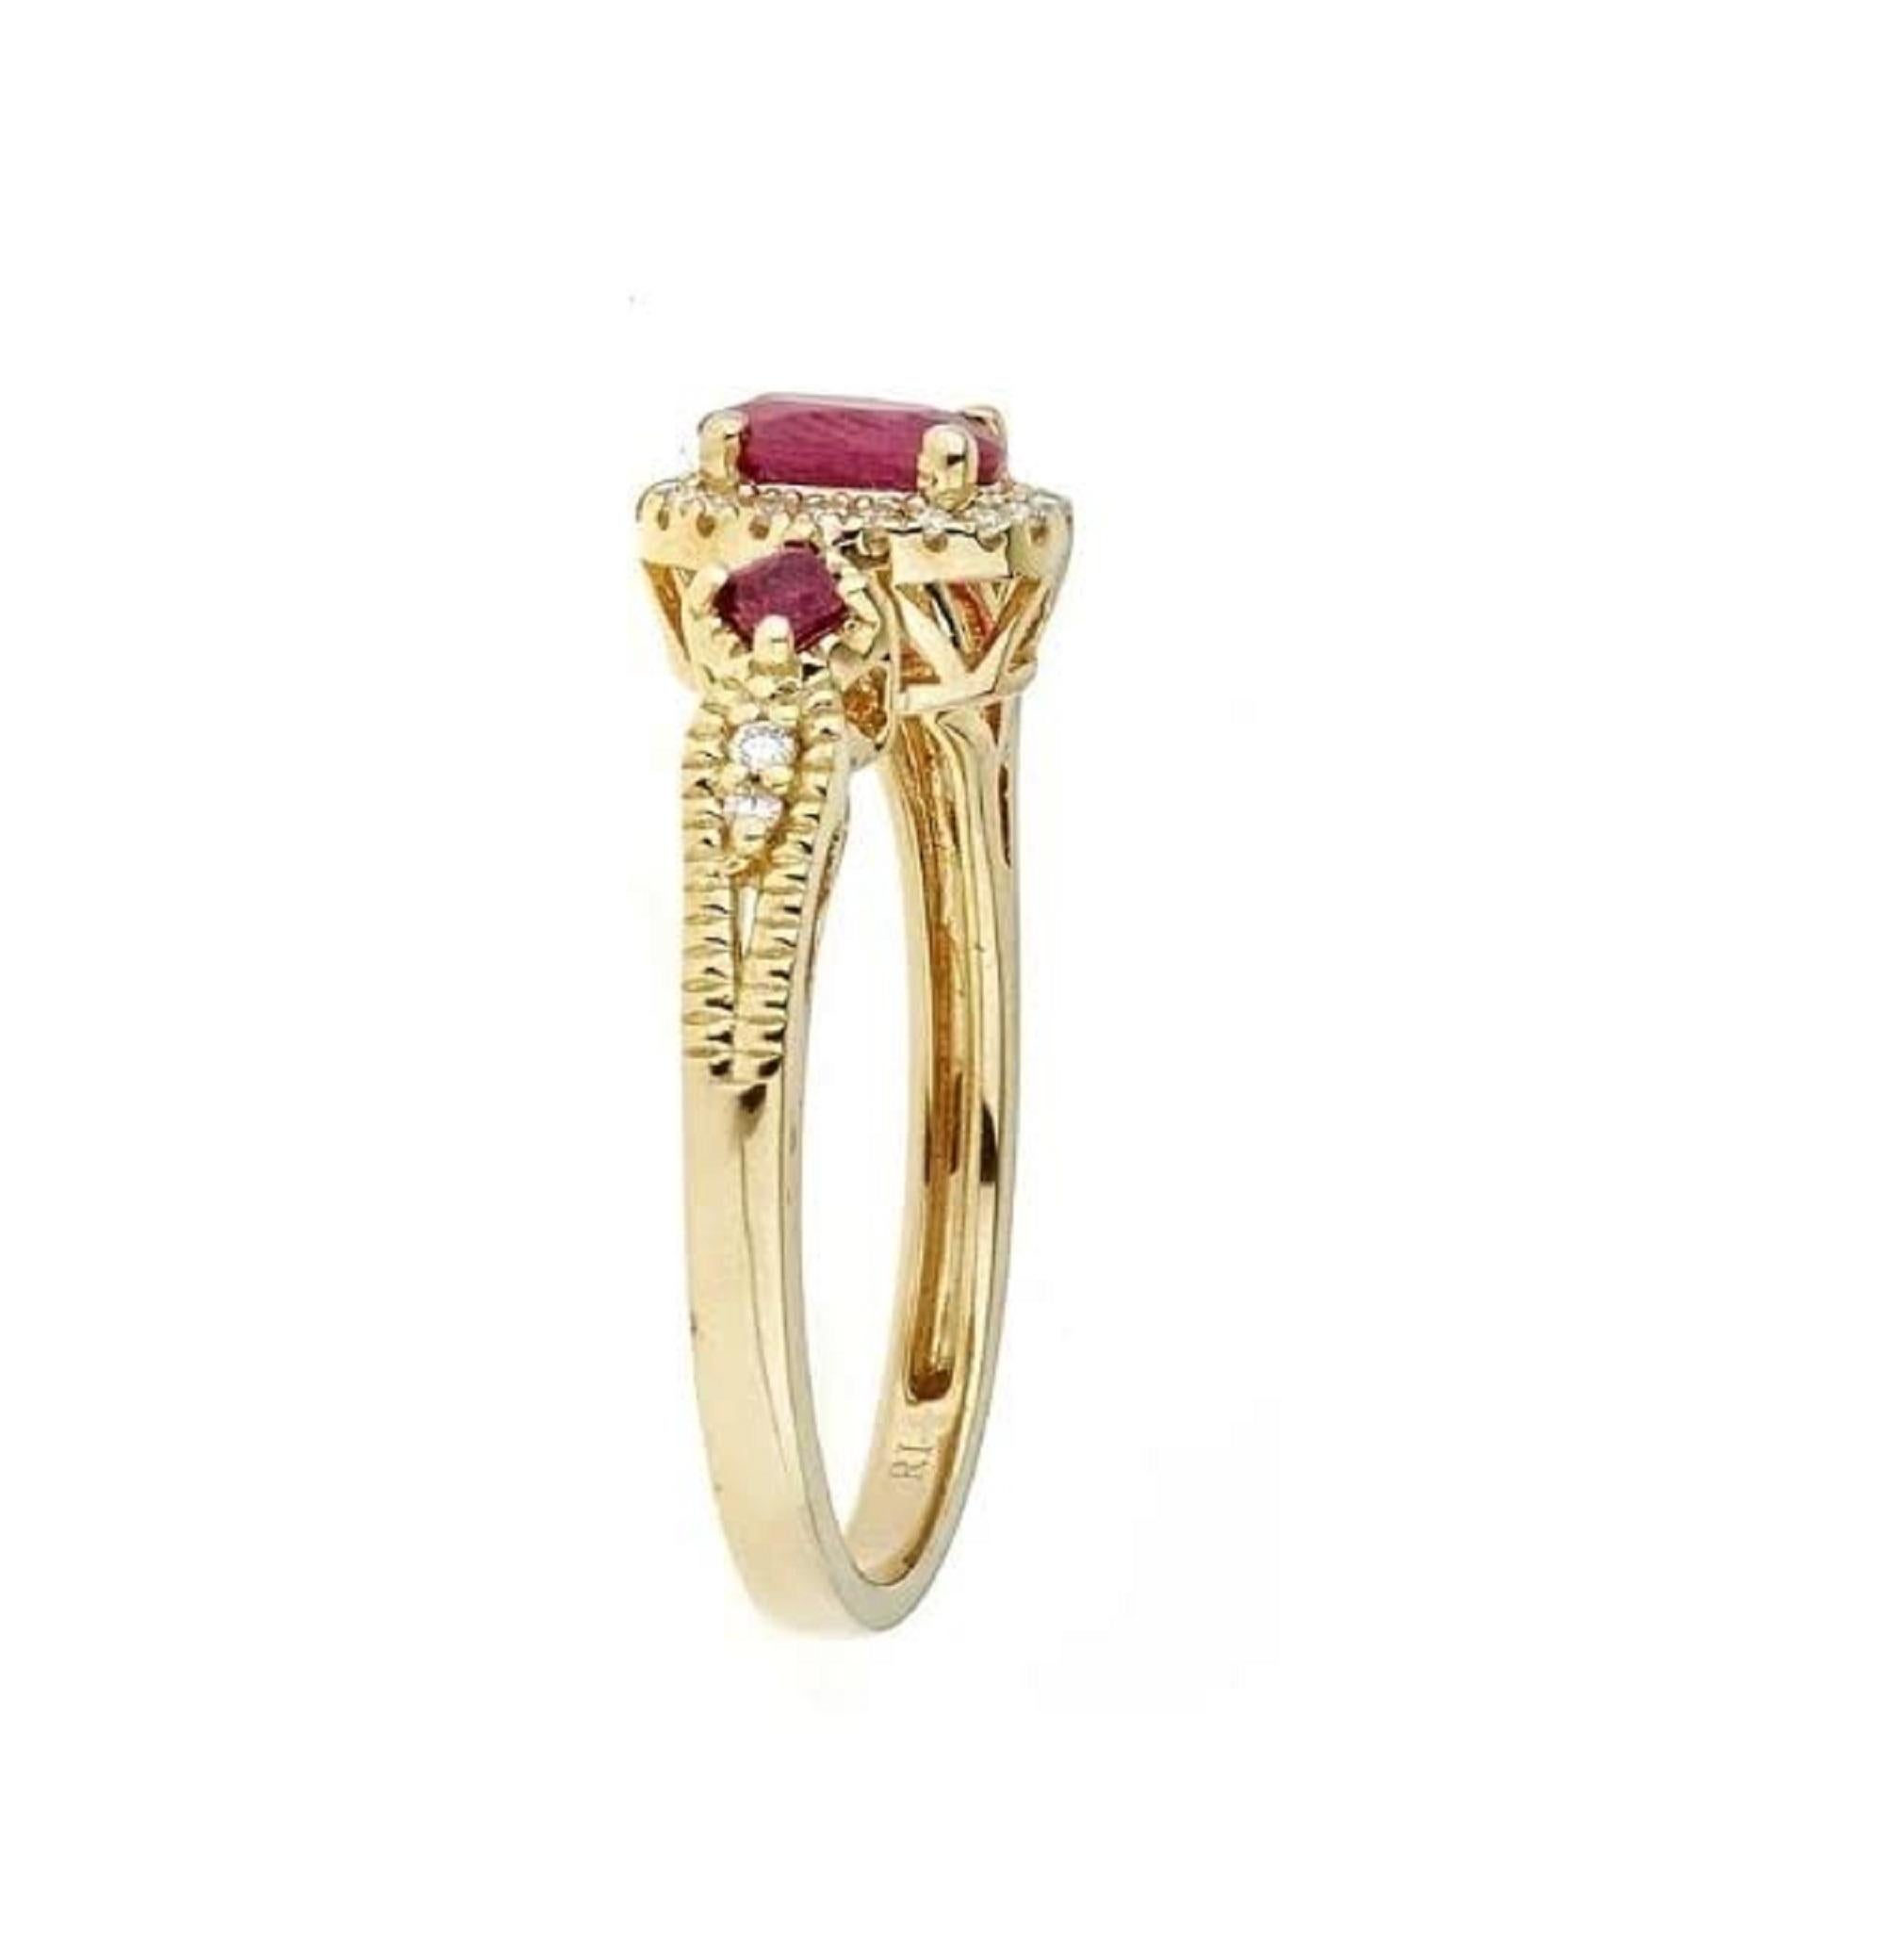 Decorate yourself in elegance with this Ring is crafted from 14-karat Yellow Gold by Gin & Grace. This Ring is made up of 6x4 mm Oval-Cut (1 pcs) 0.56 carat, 2.0 mm Square-cut (2pcs) 0.12 carat Ruby and Round-cut White Diamond (24 Pcs) 0.10 Carat.